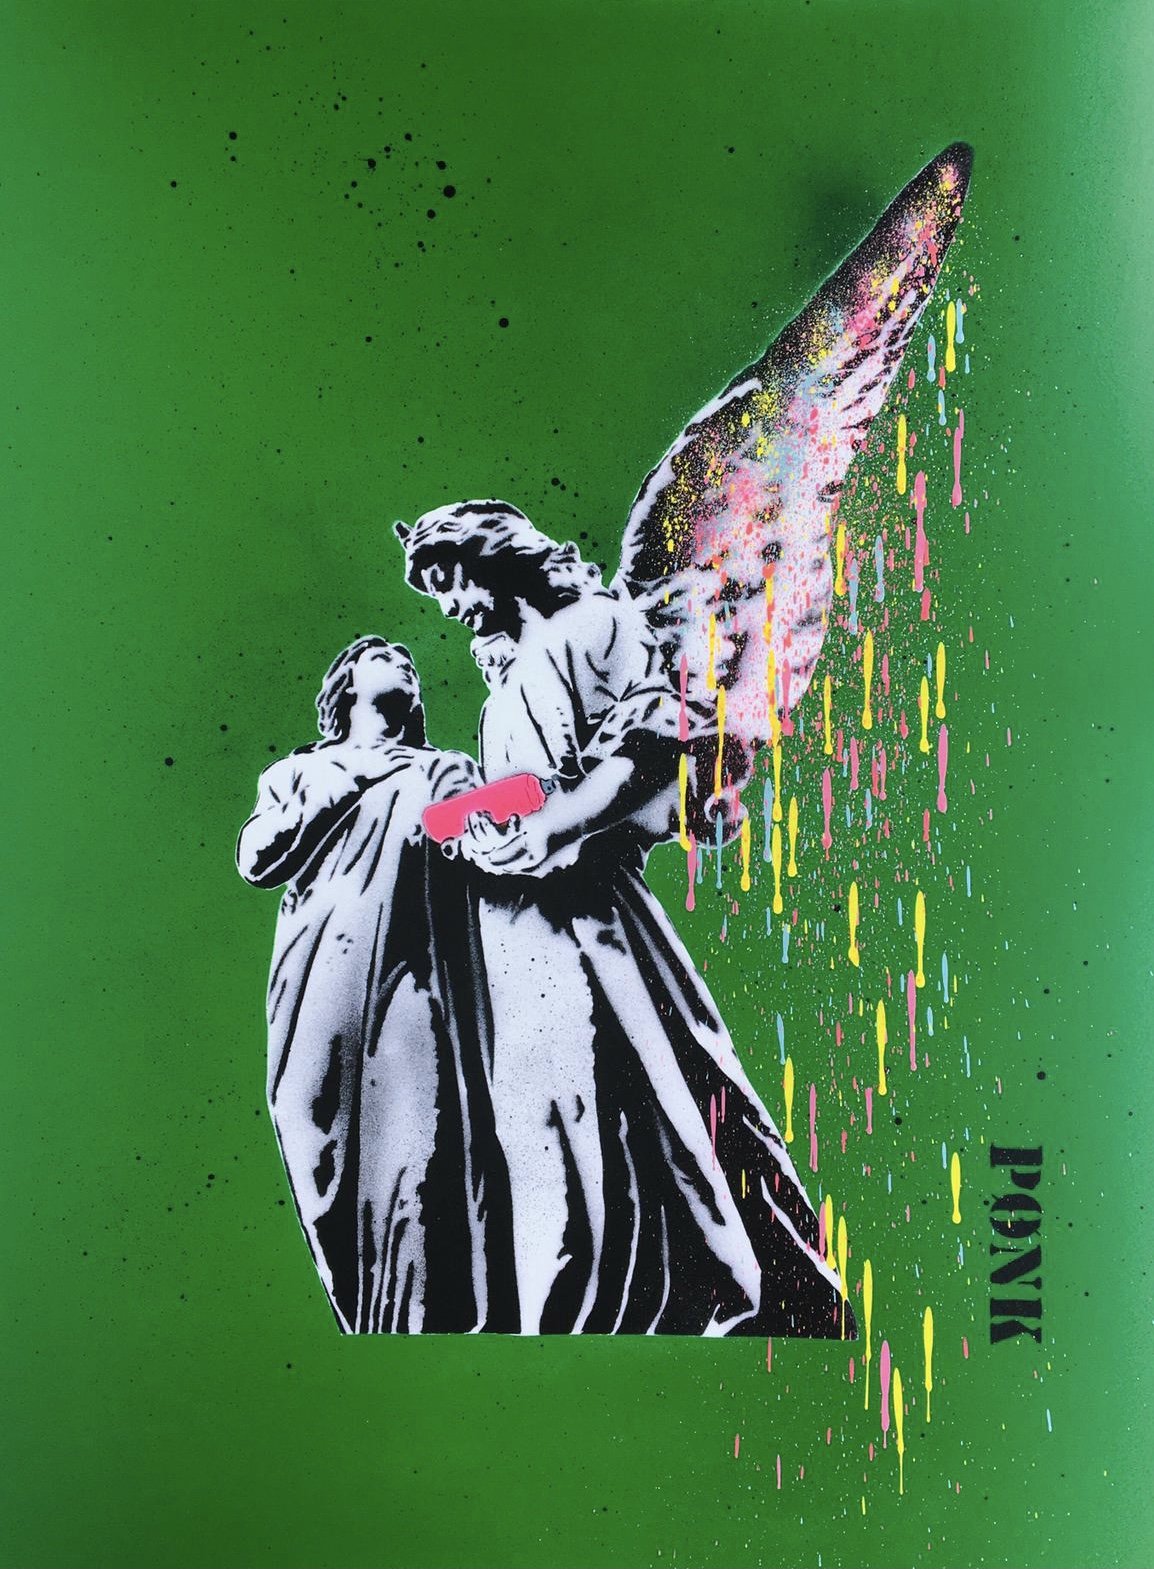 Spray for Love - 1/1 Editions